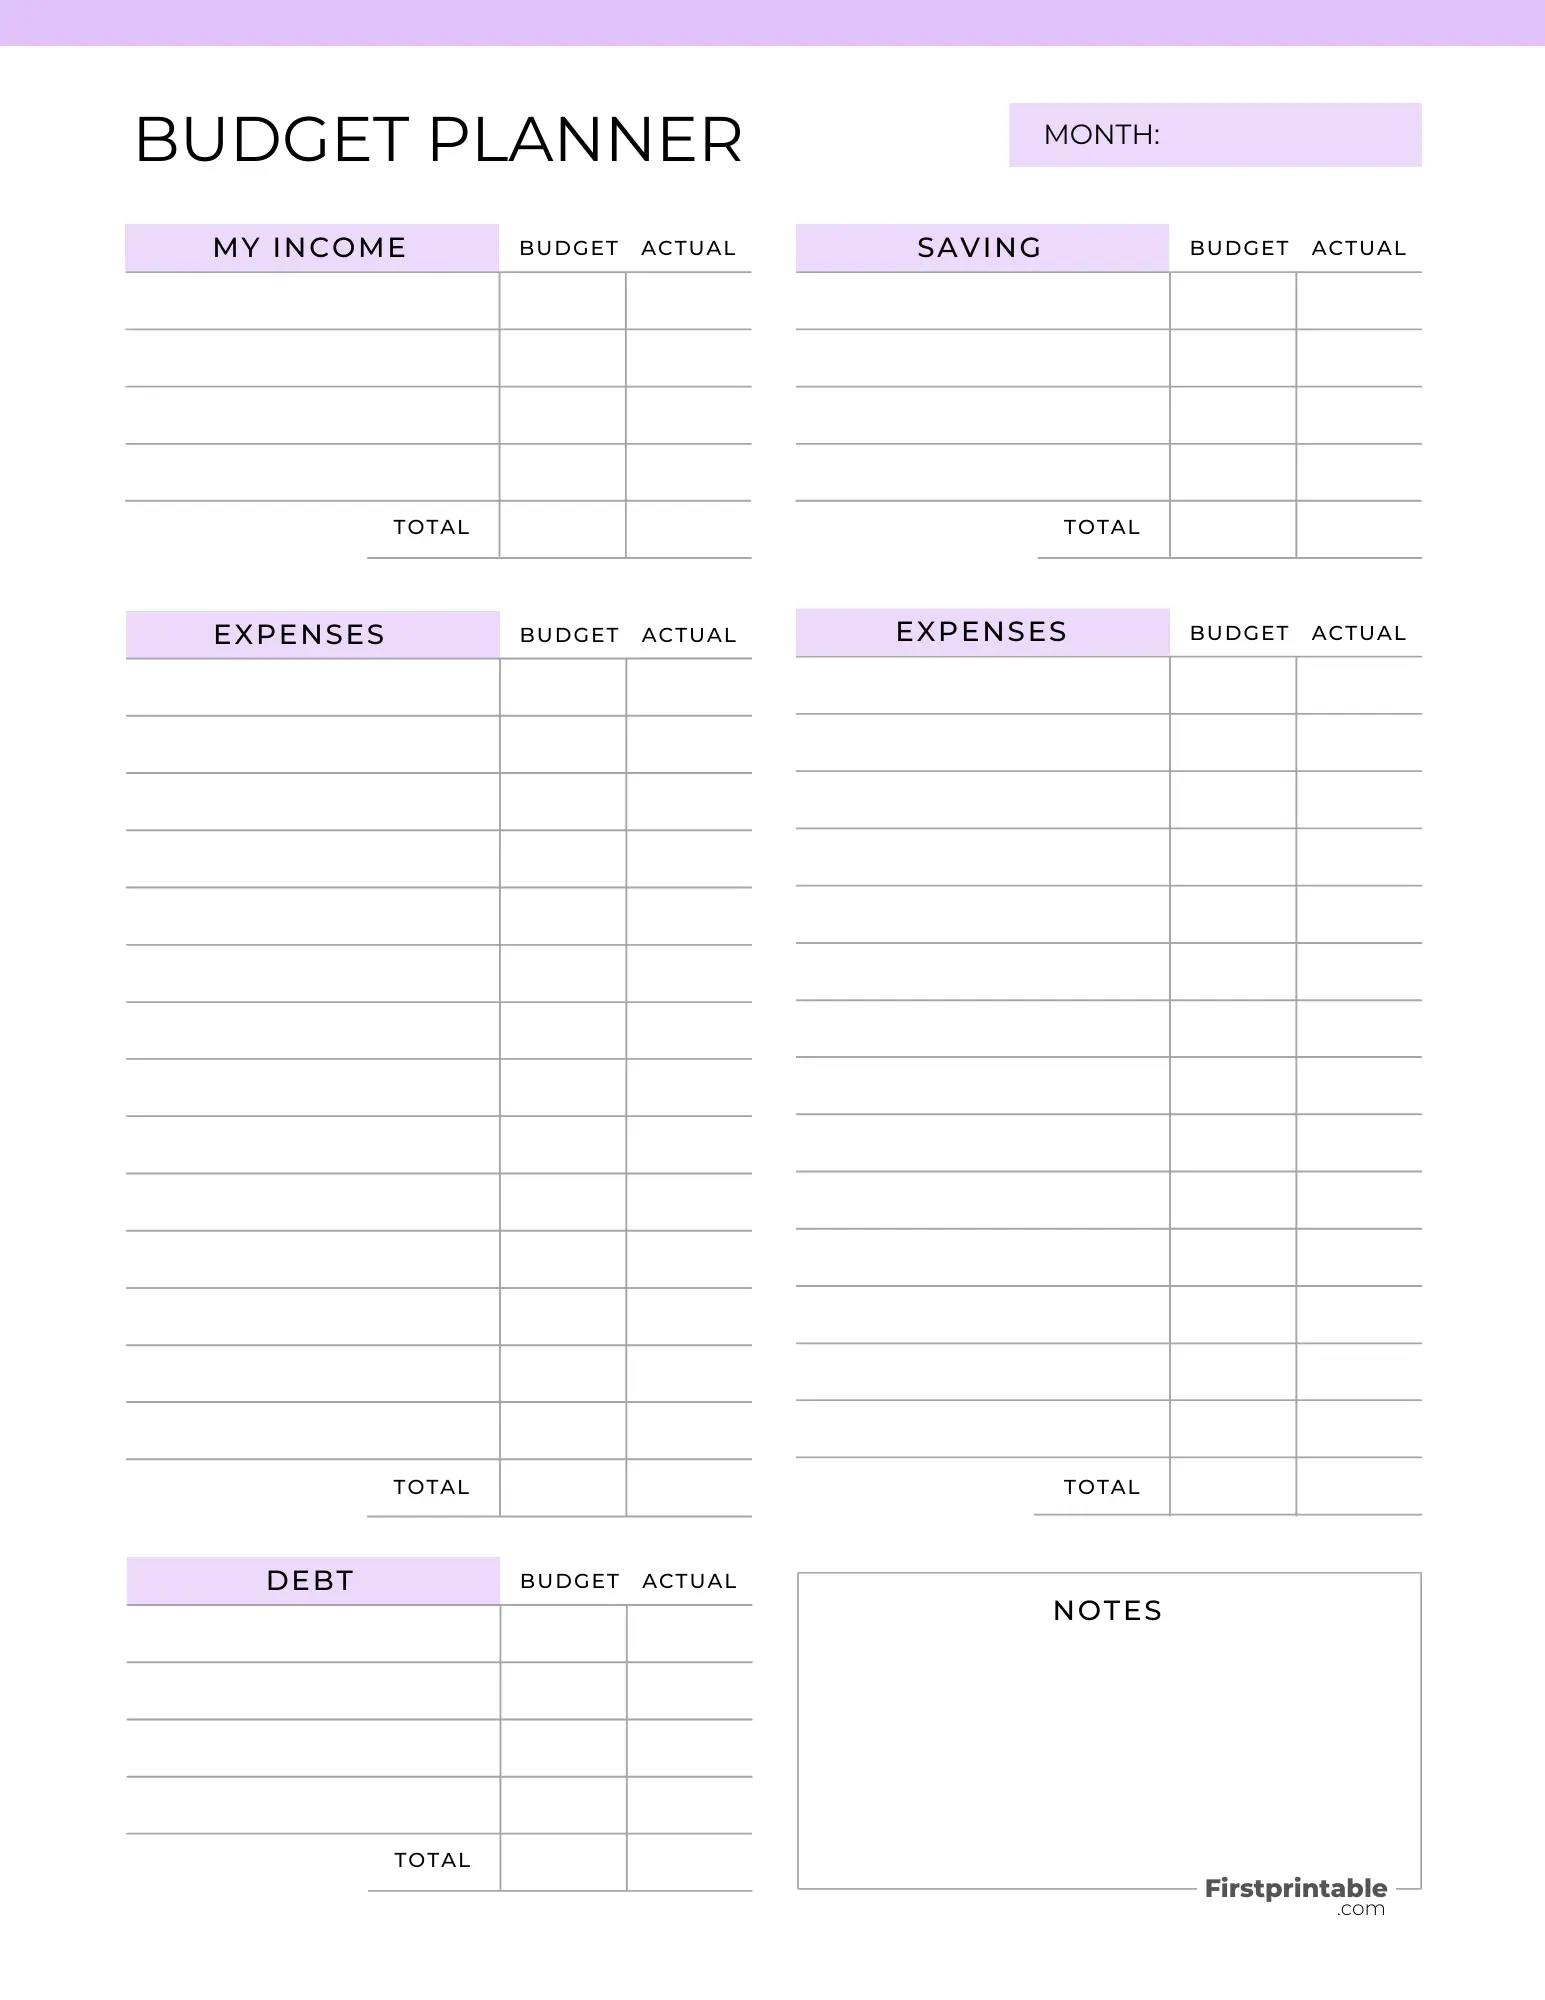 Monthly Budget Planner - aesthetic Purple Color